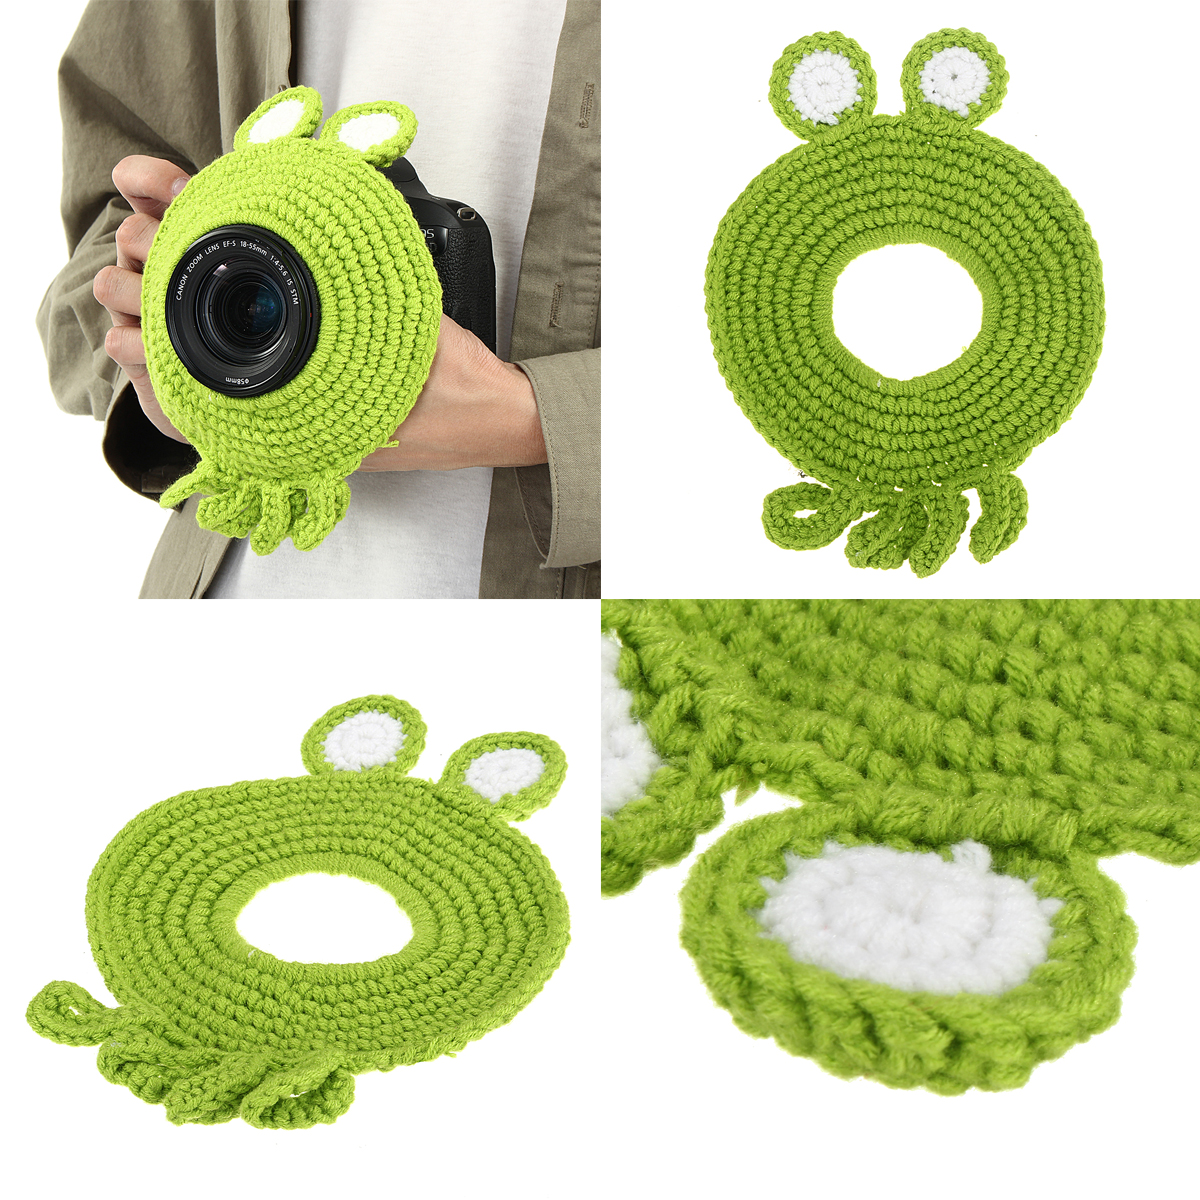 Hand-knitted Wool Decor Case For Camera Lens Decorative Photo Guide Doll Toys For Kids